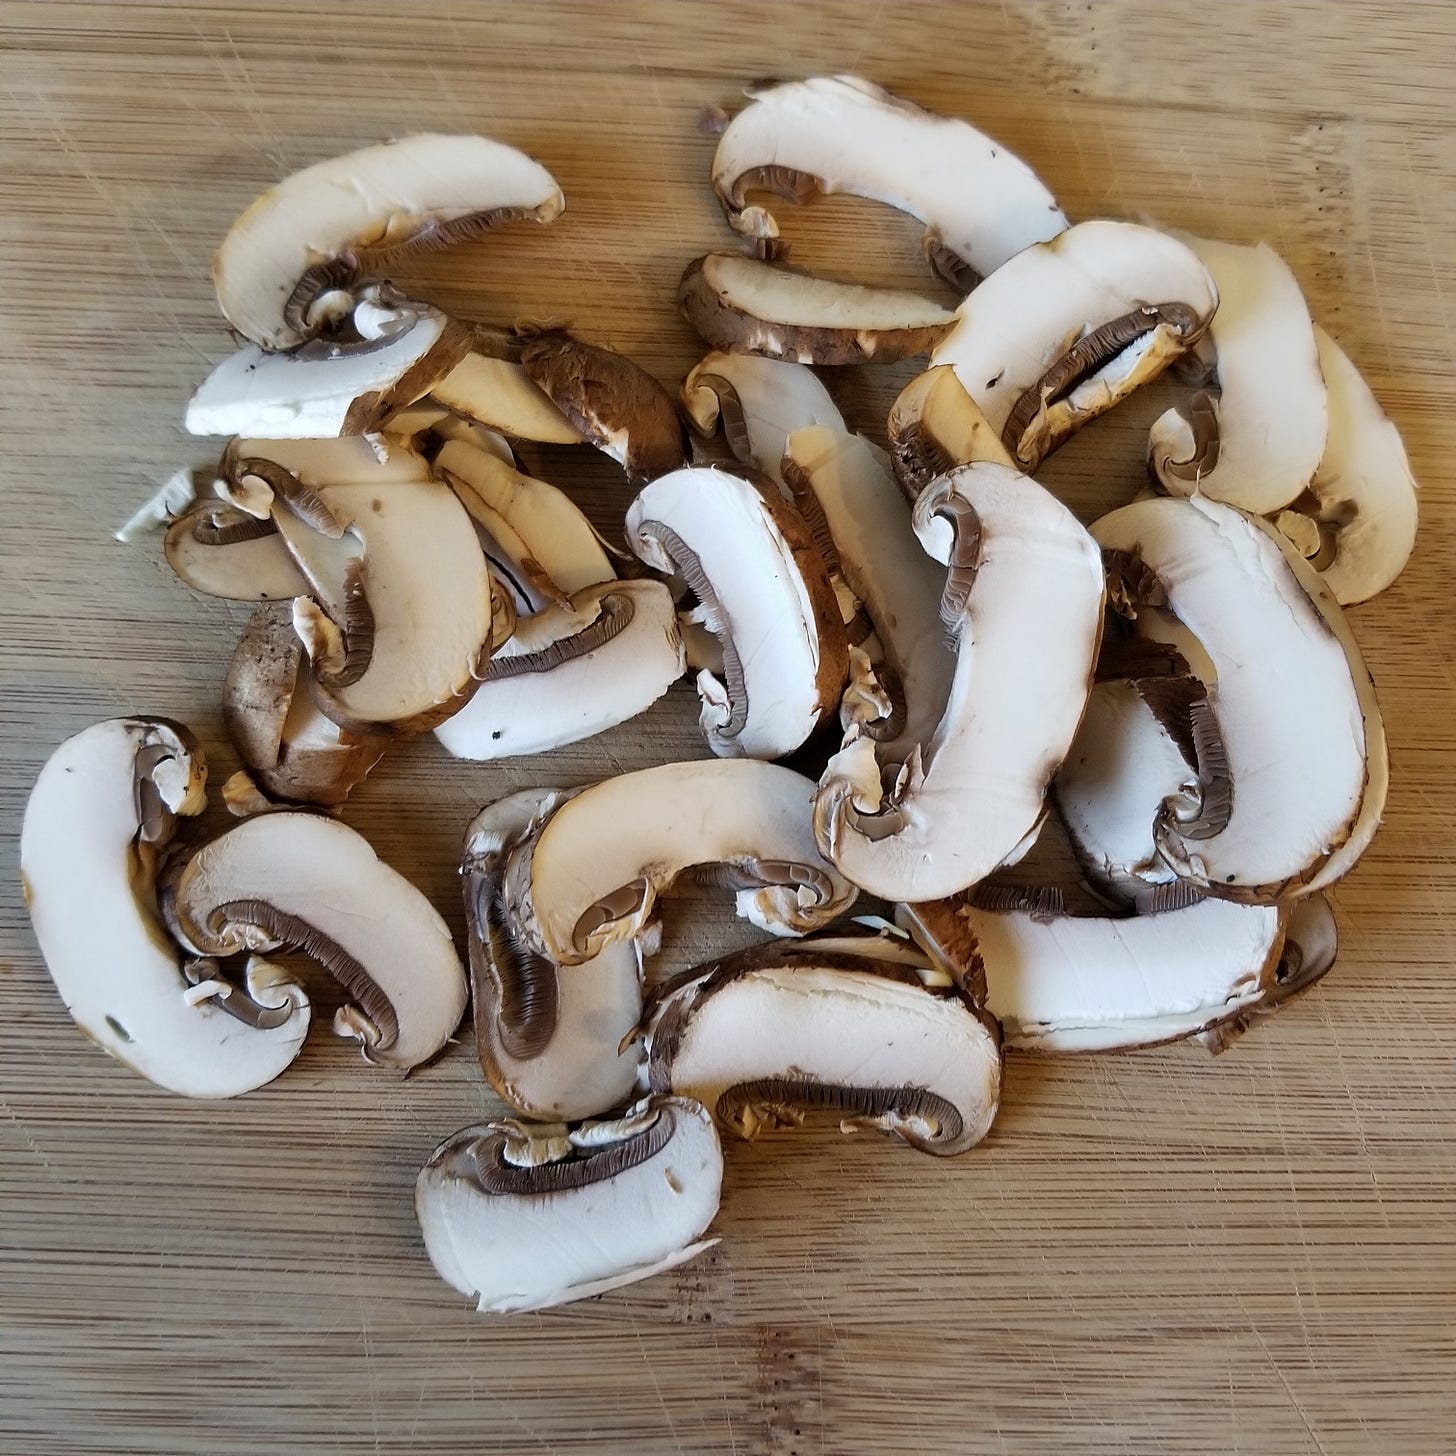 a picture I took of sliced mushrooms